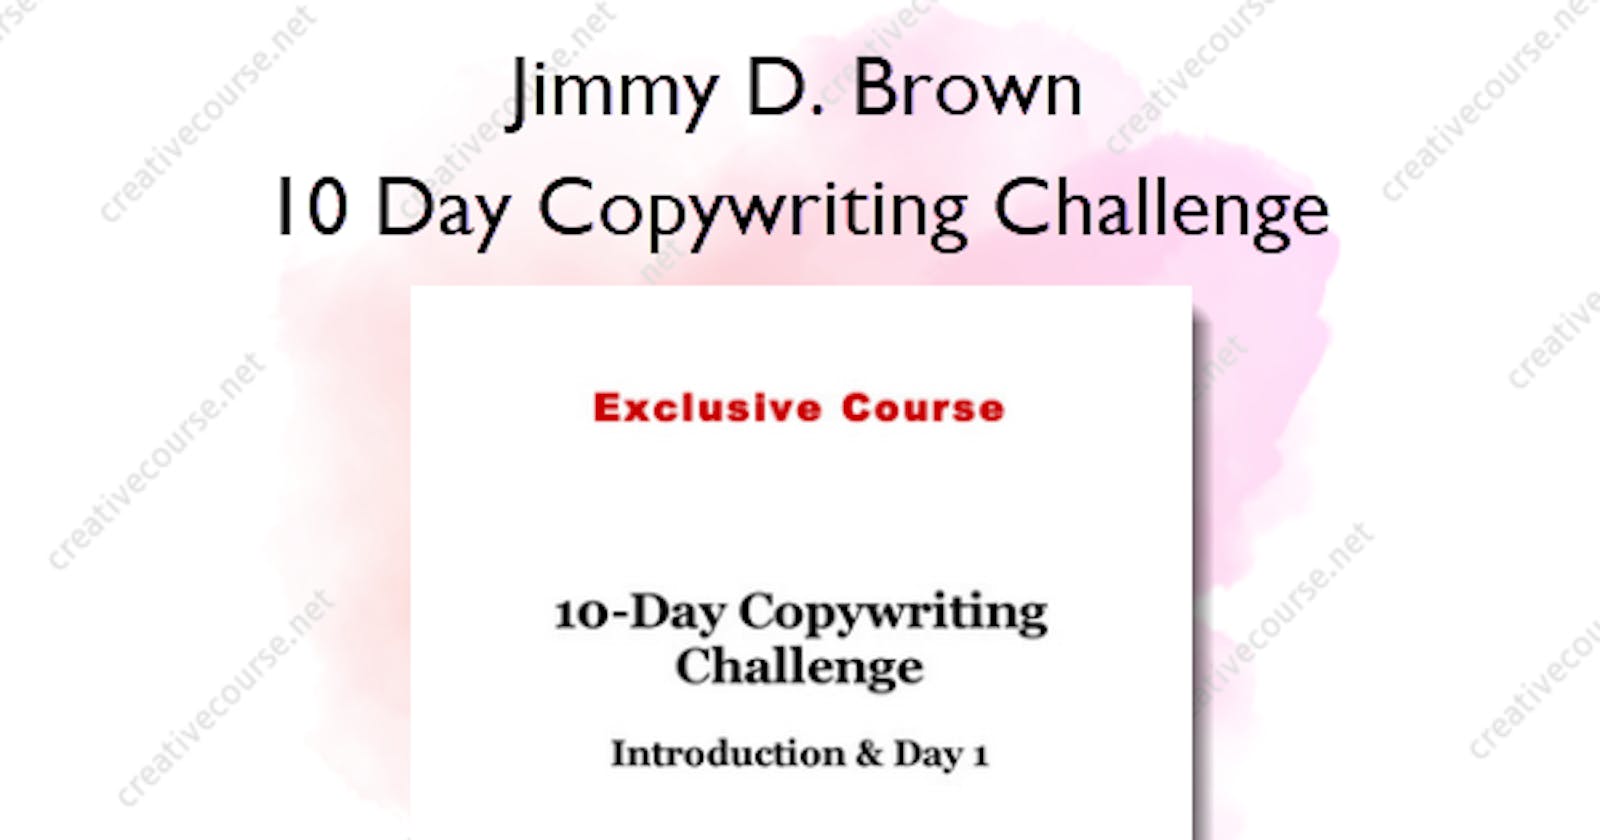 10 Day Copywriting Challenge – Jimmy D. Brown